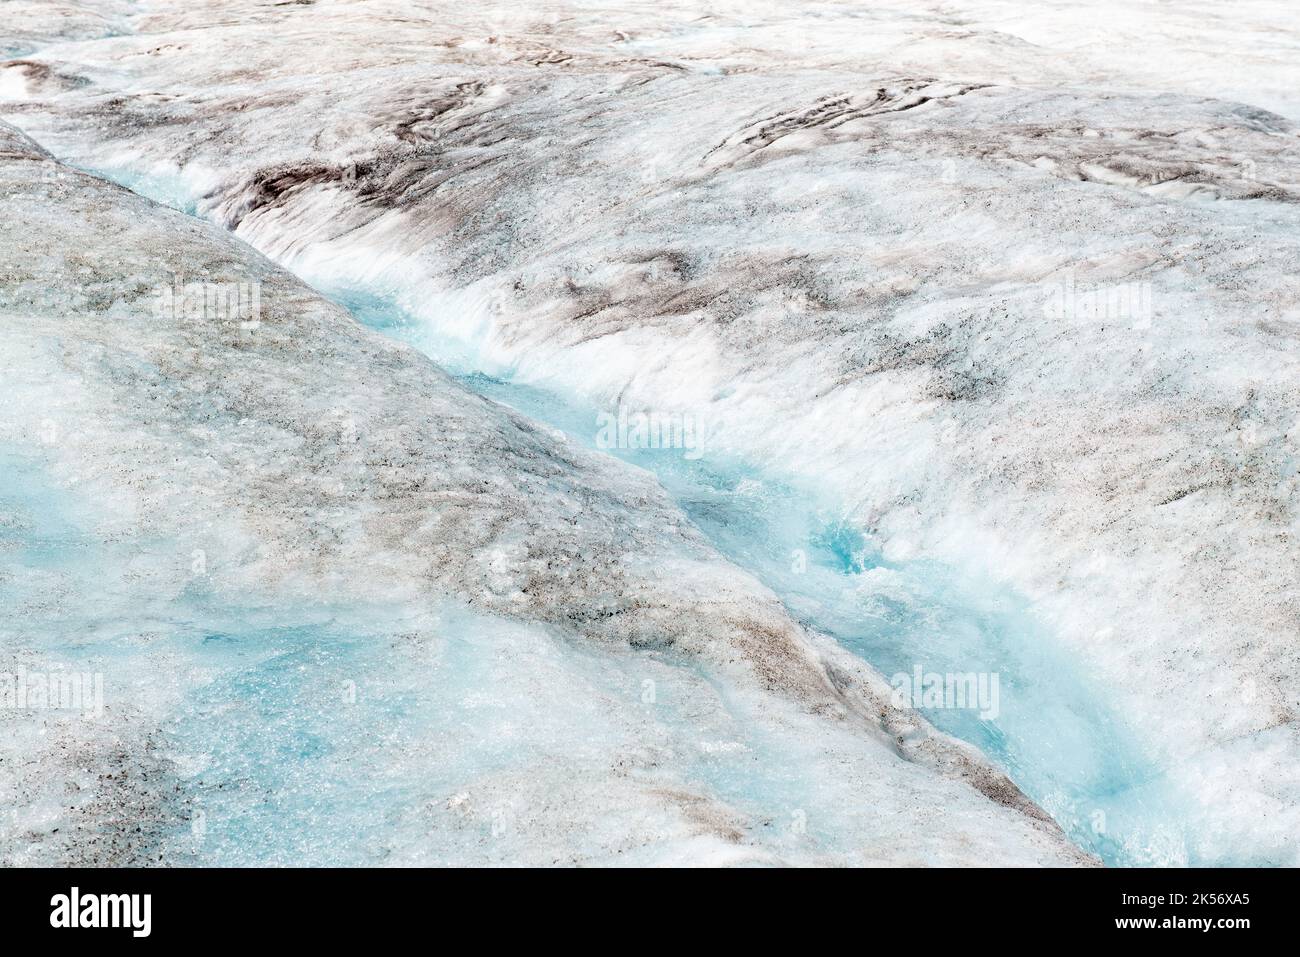 Melting Athabasca glacier with a small river in the ice due to climate change, Jasper national park, Alberta, Canada. Stock Photo